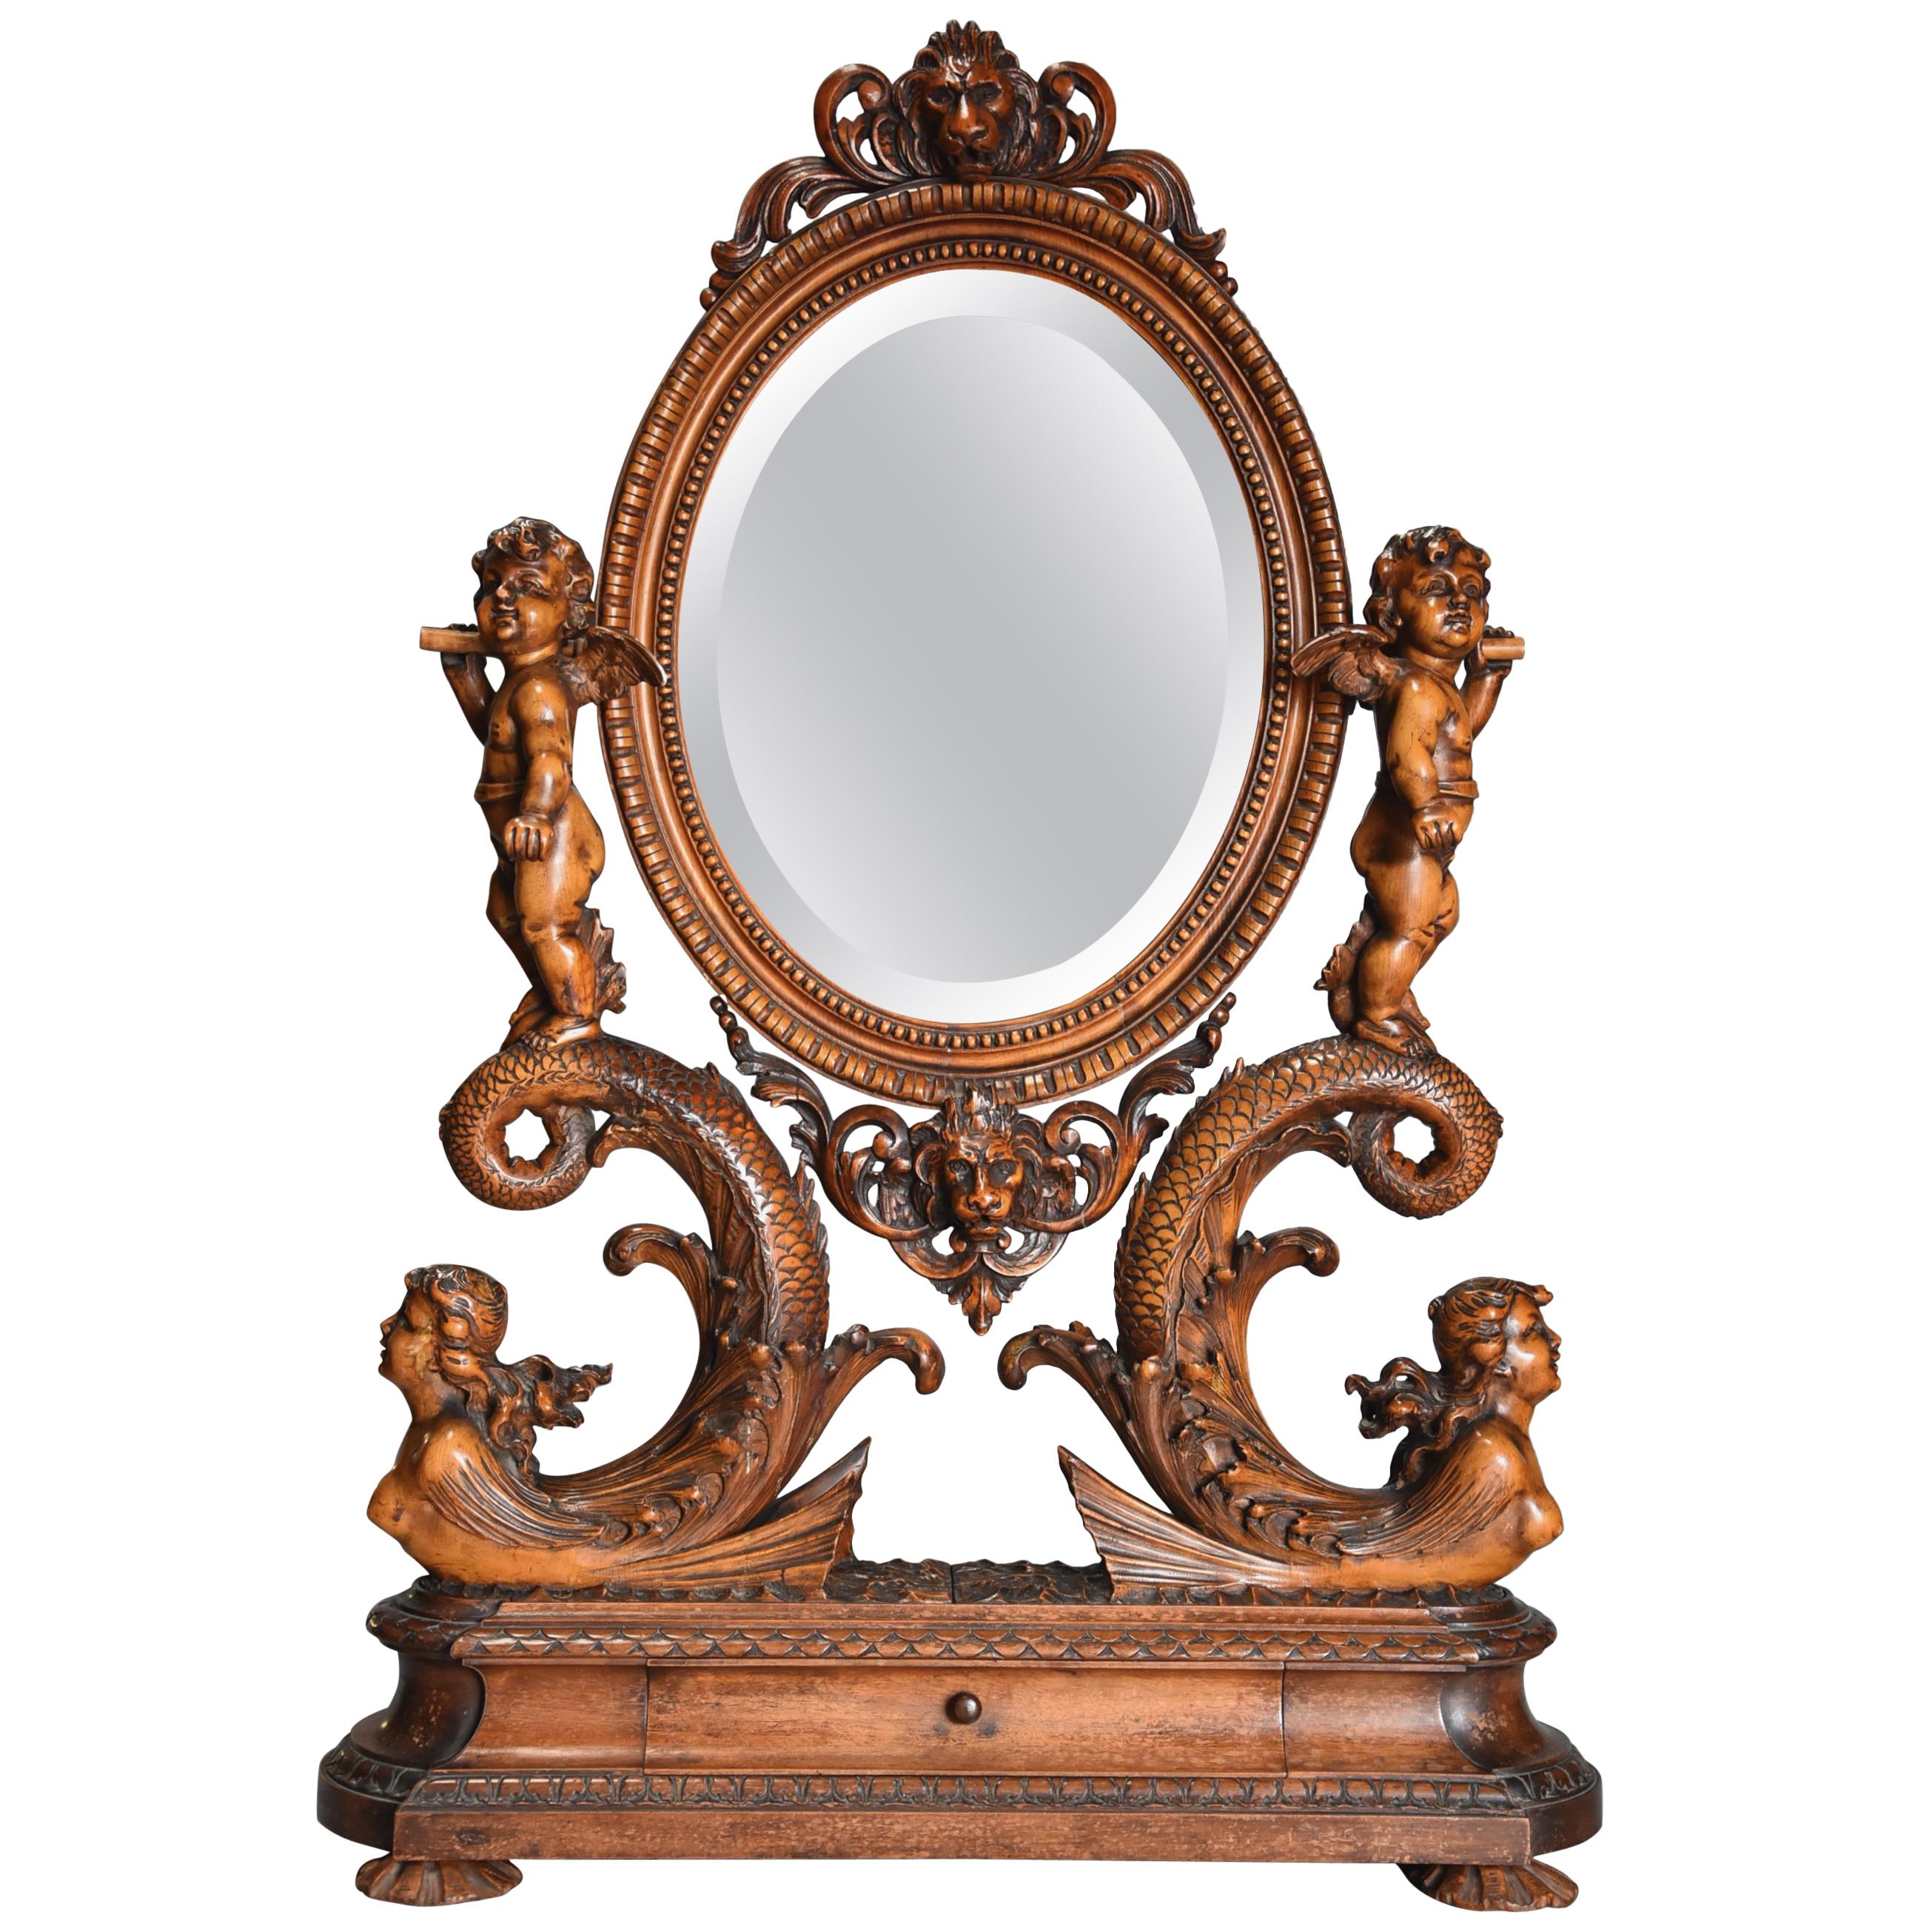 Exhibition Quality Superbly Carved Mid-19th Century Lime Wood Table Mirror